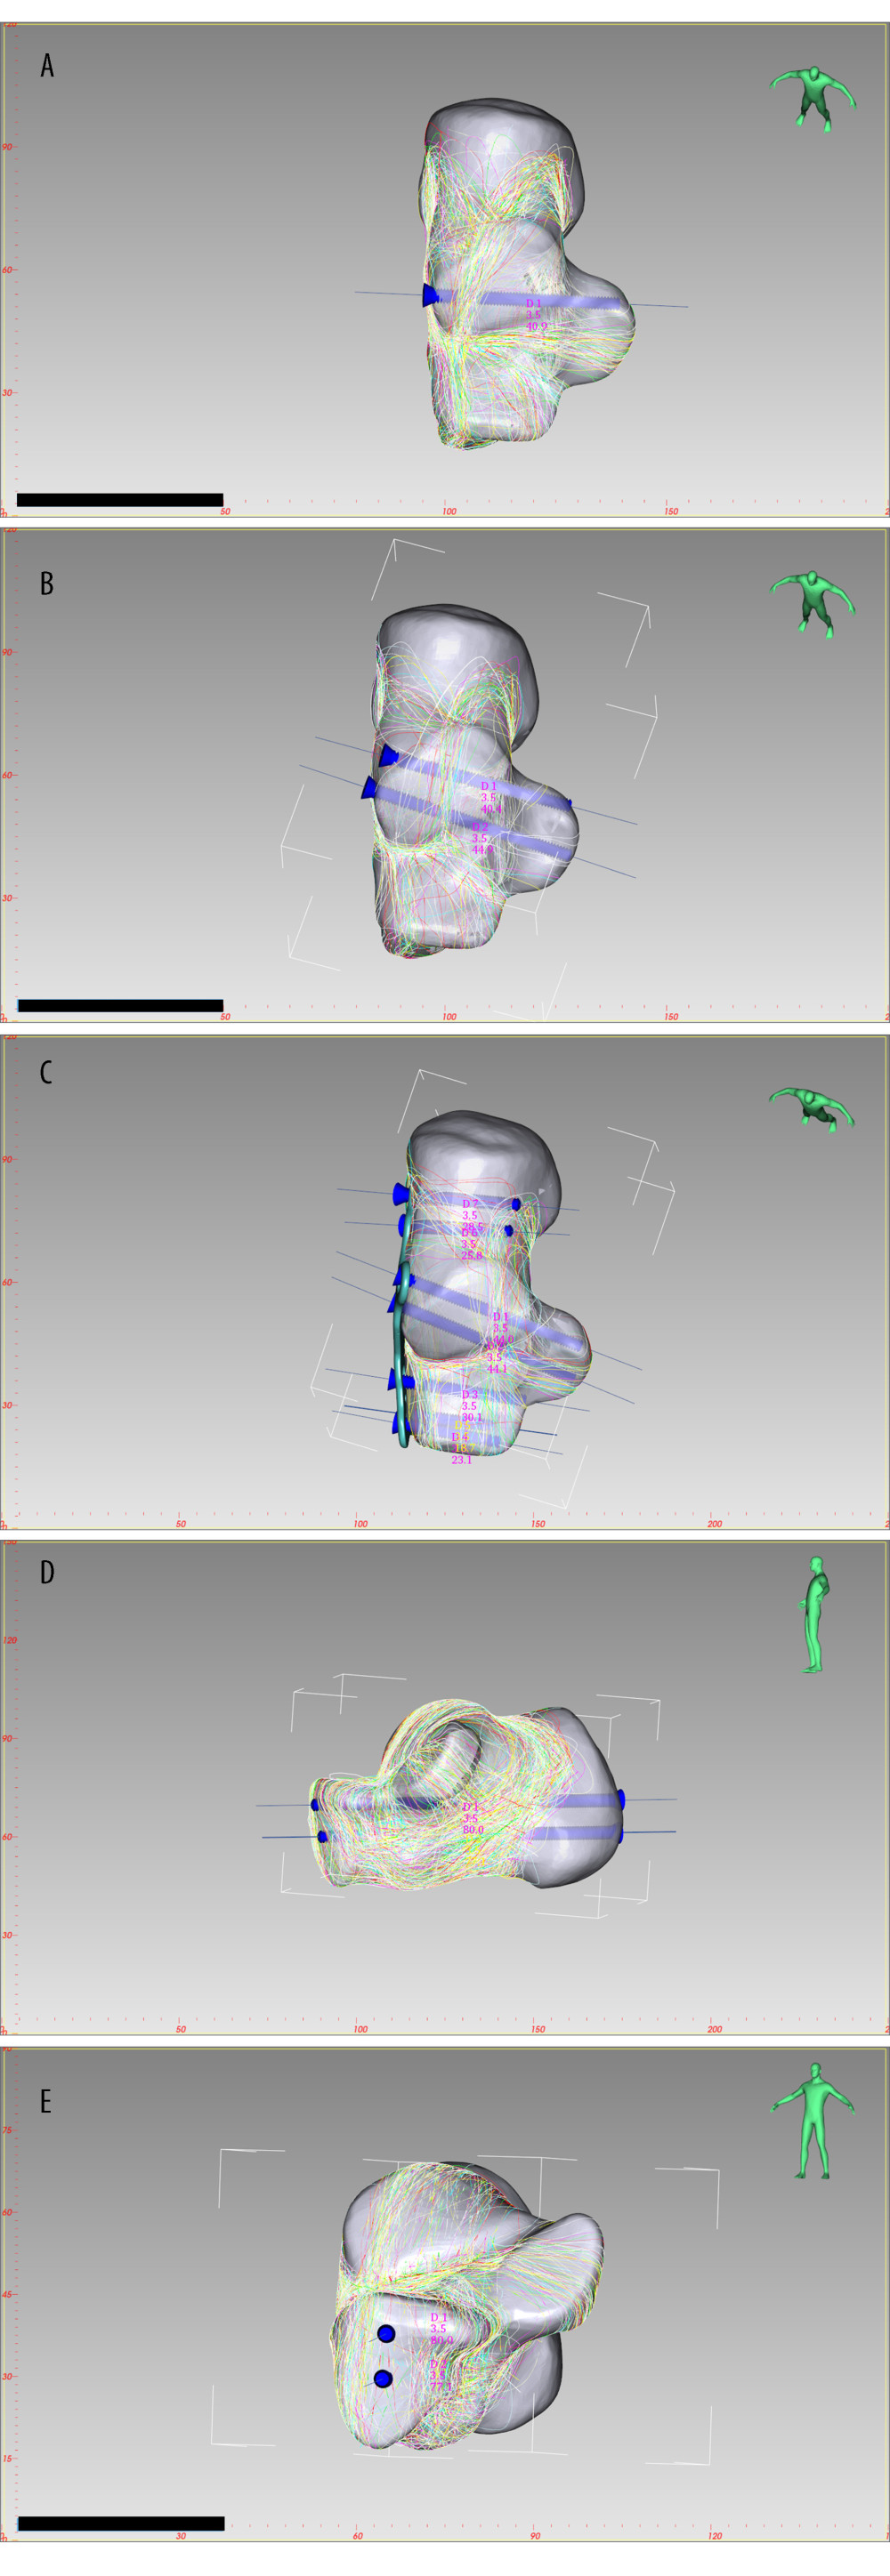 Optimal screw distribution in Sanders type 2A (A), Sanders type 2B (B) and Sanders type 2C (C) joint depression fracture. Optimal screw distribution in joint depression fracture (D, E) Medial view, Rear view. Created by E-3D Medical 18.01 software (Central South University, Changsha, China).